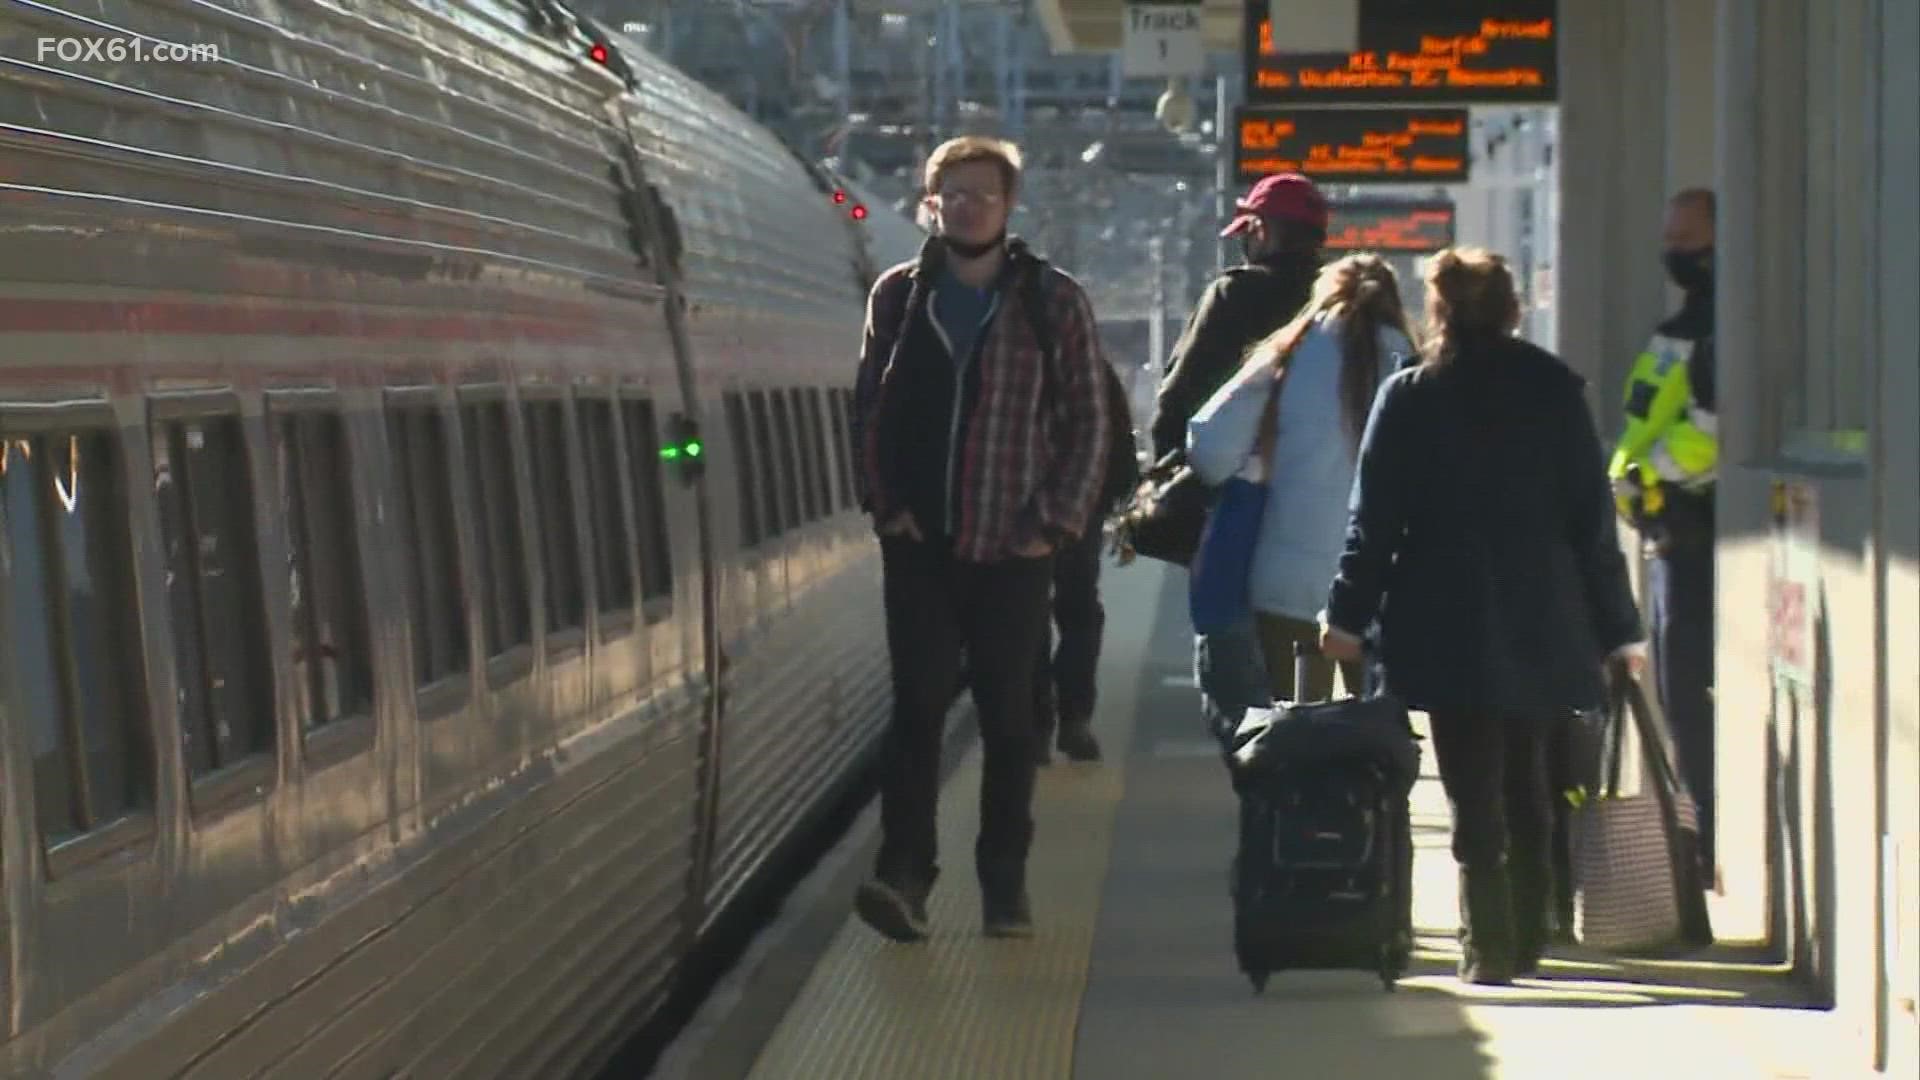 Amtrak and Metro-North are gearing up for the crowds, which are expected to be 80% higher than two years ago.